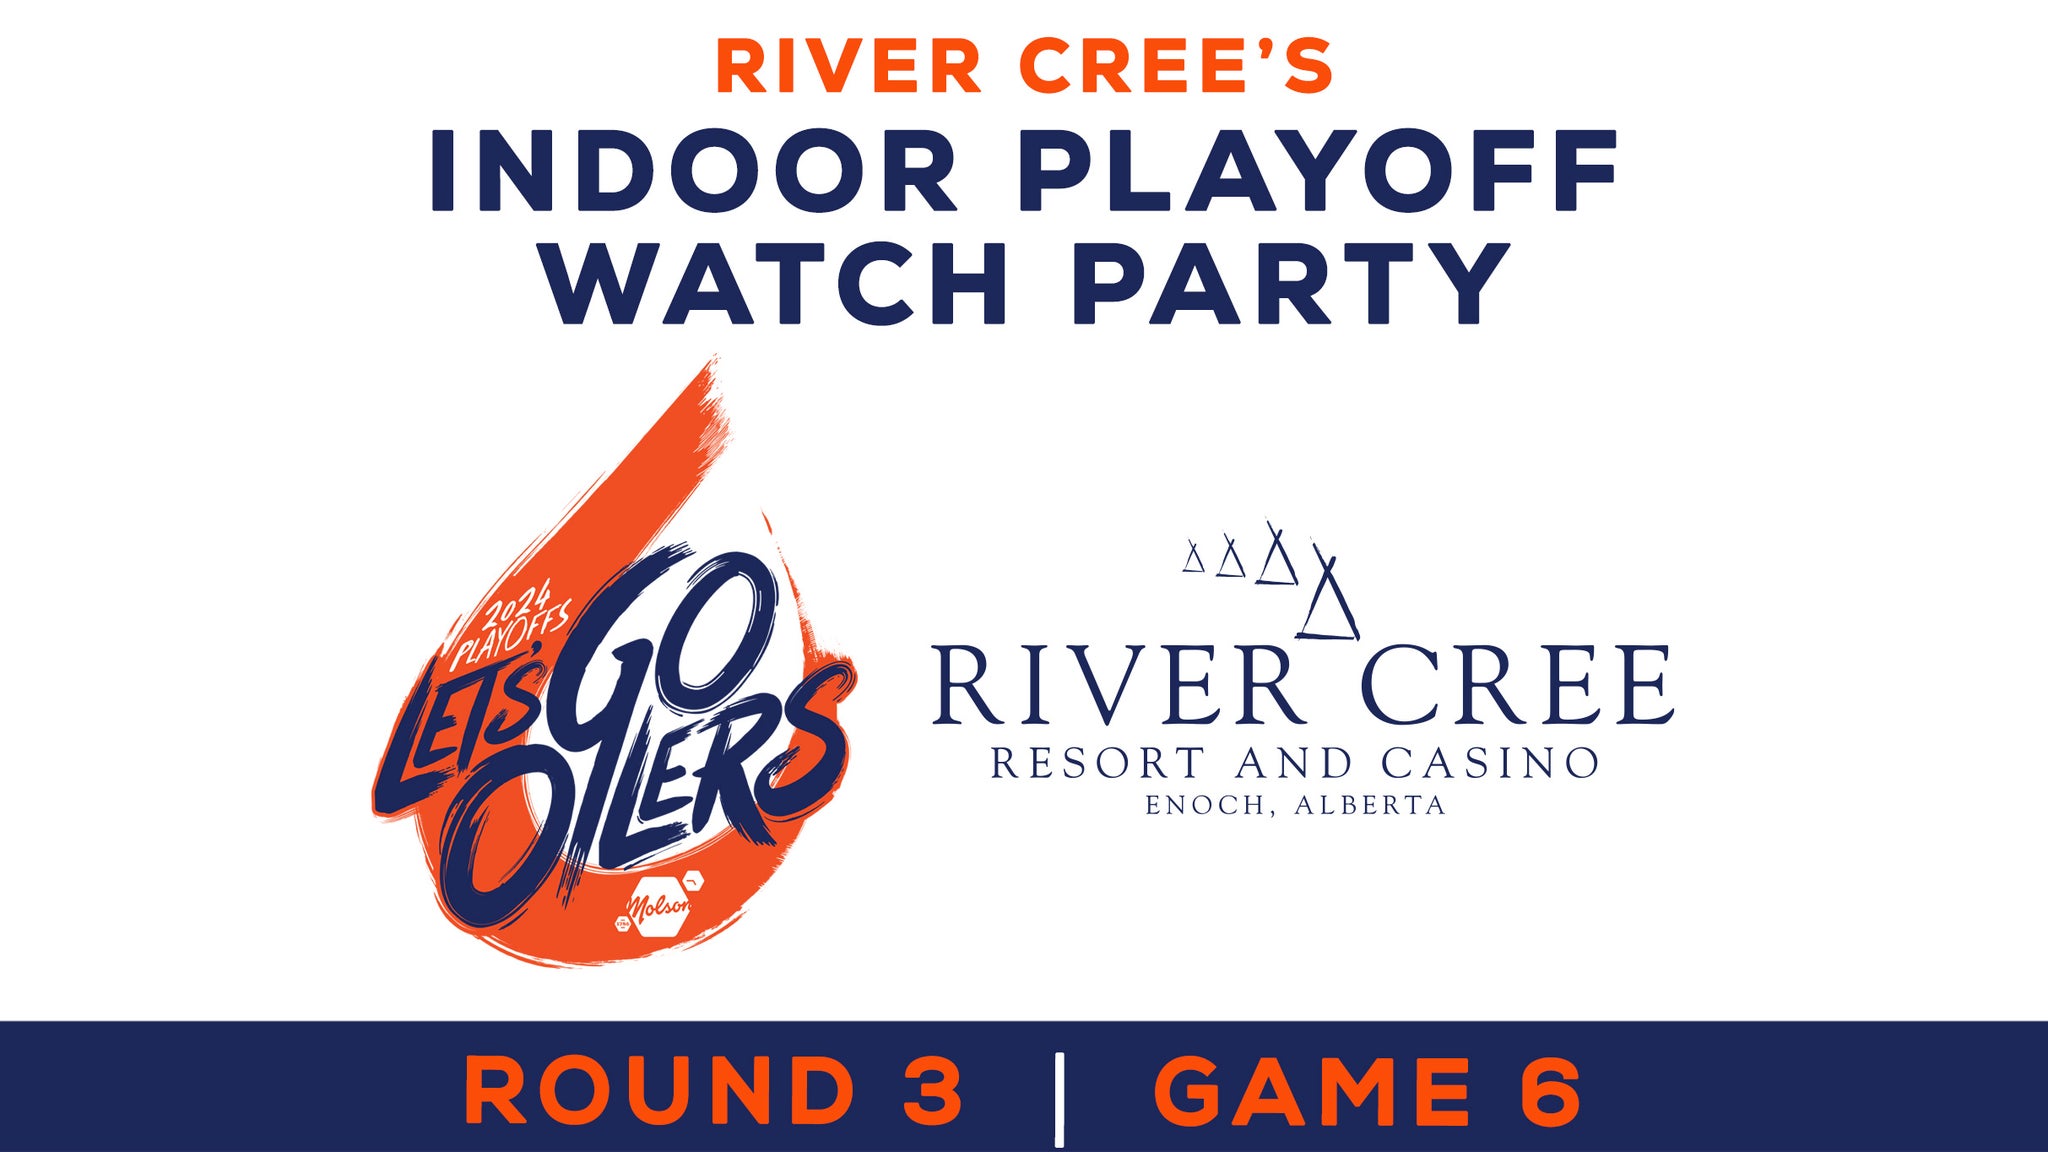 River Cree's Watch Party AT THE BALLROOM - Round 3 - Game 6